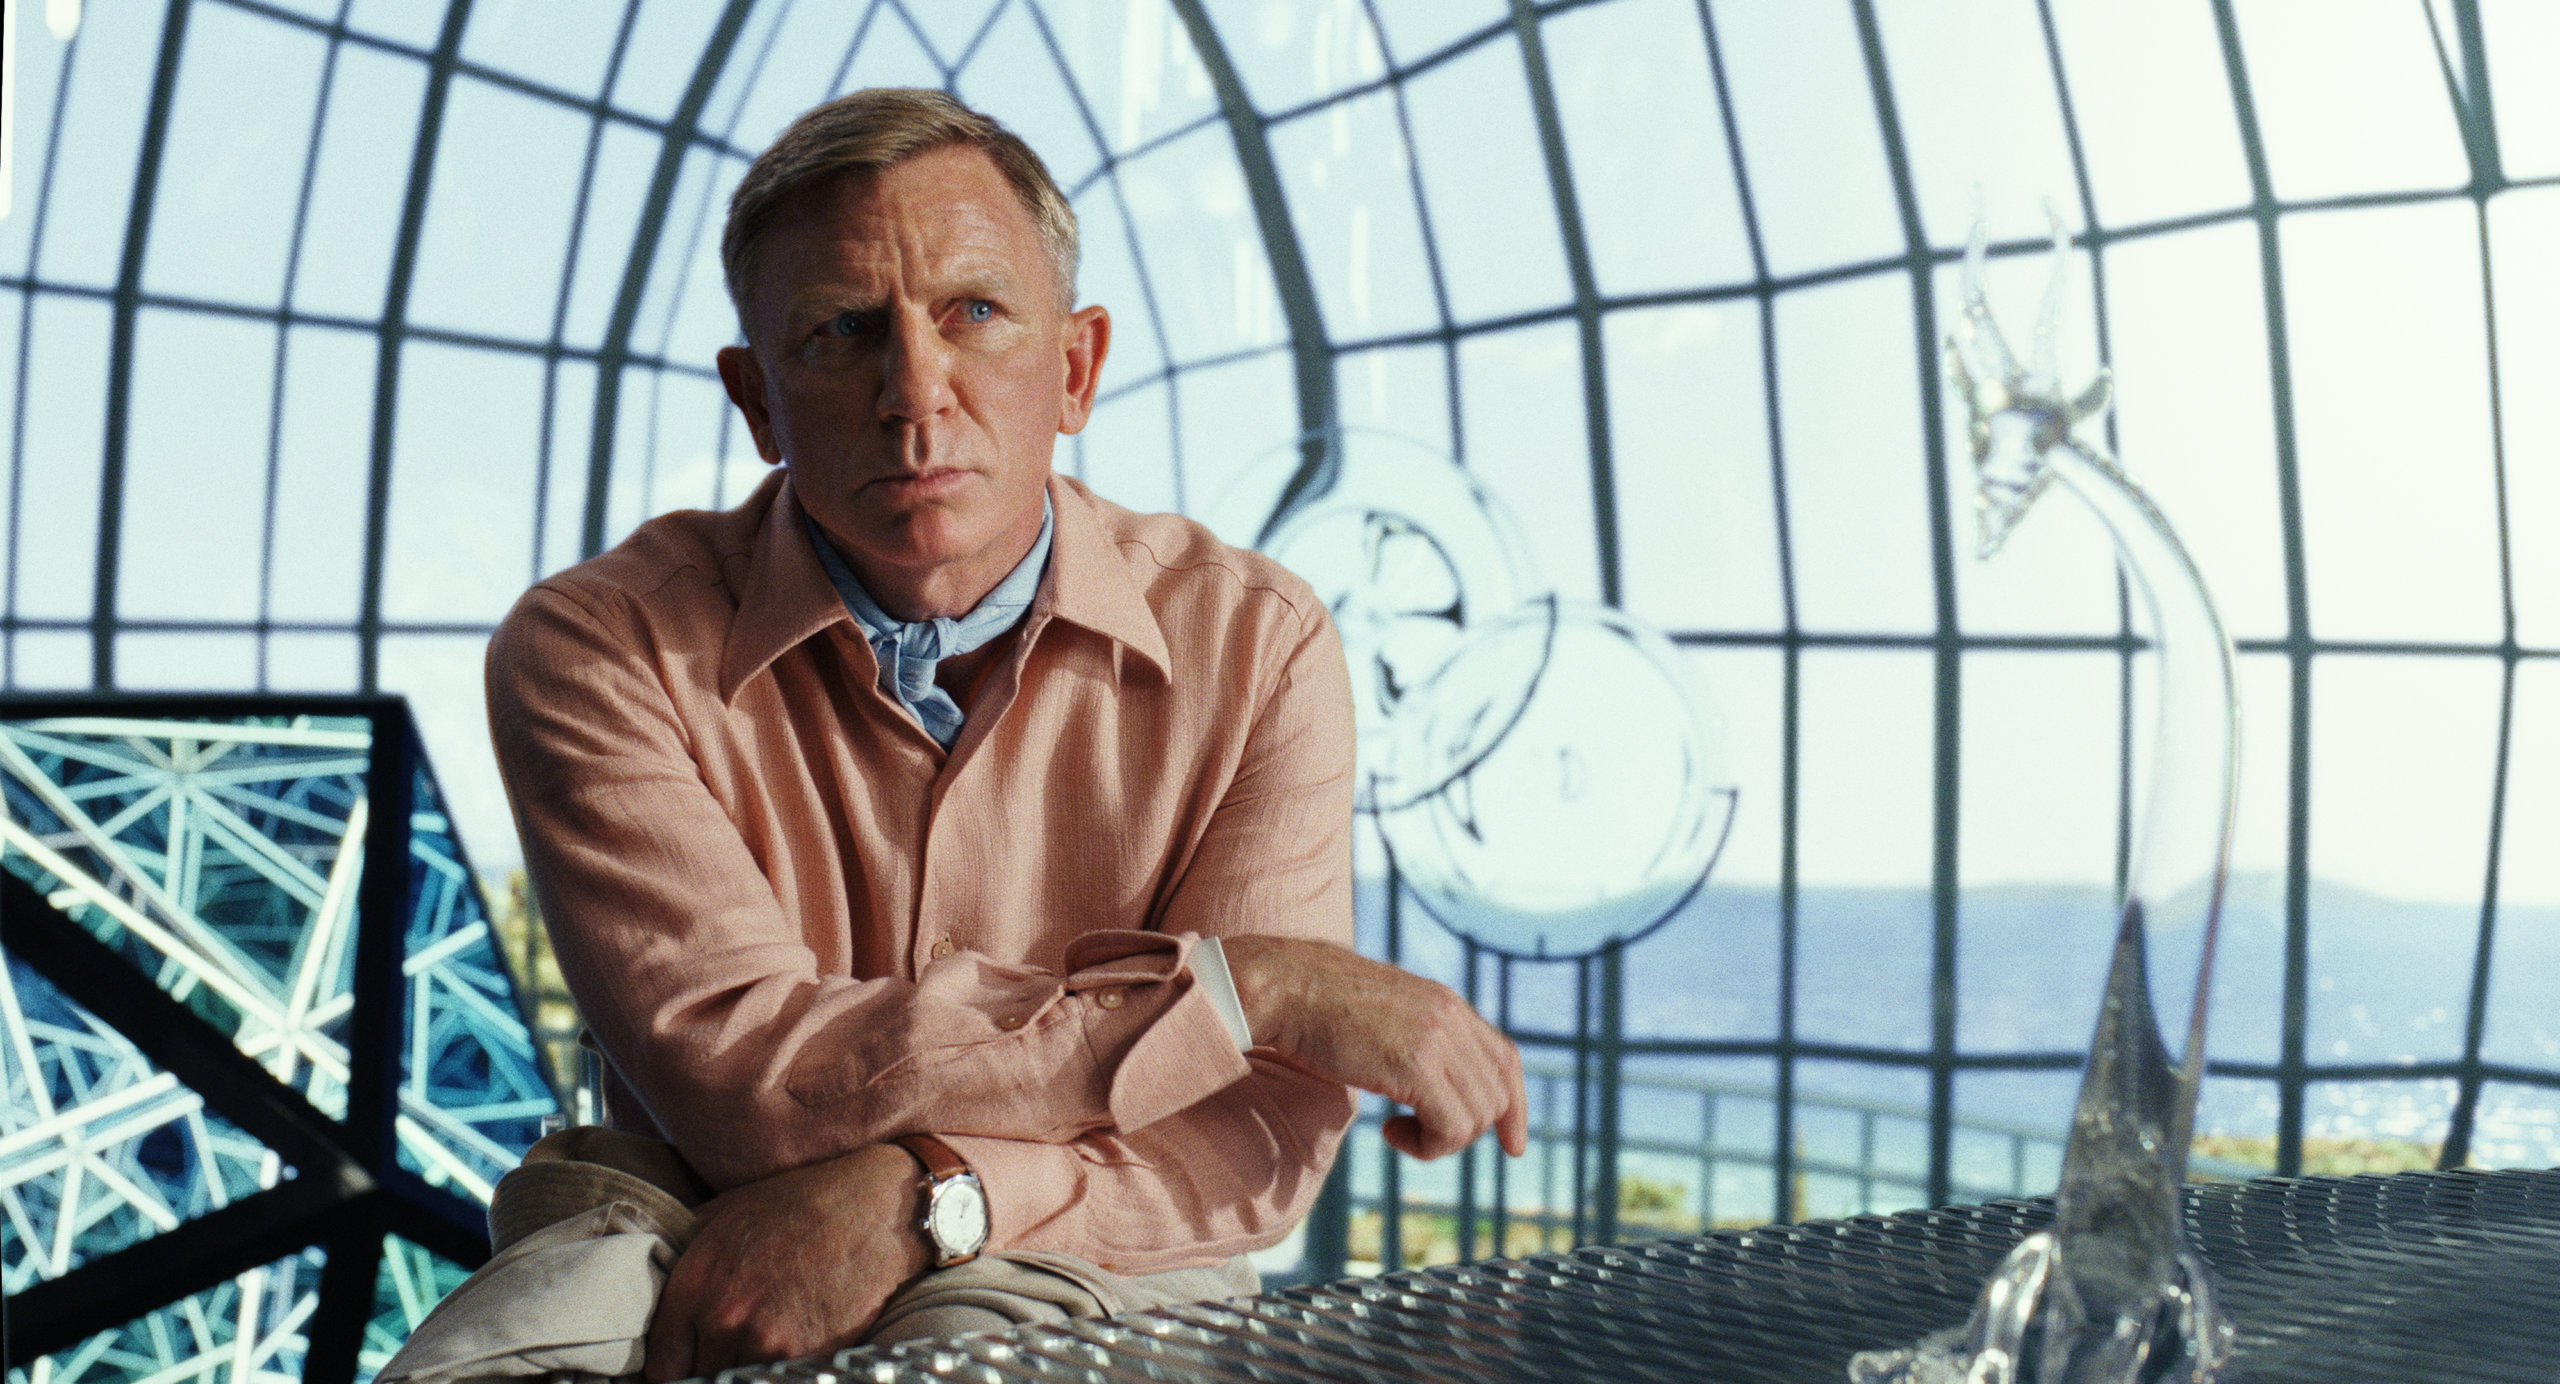 Daniel Craig as Detective Benoit Blanc in "Glass Onion: A Knives Out Mystery" at HIFF 2022